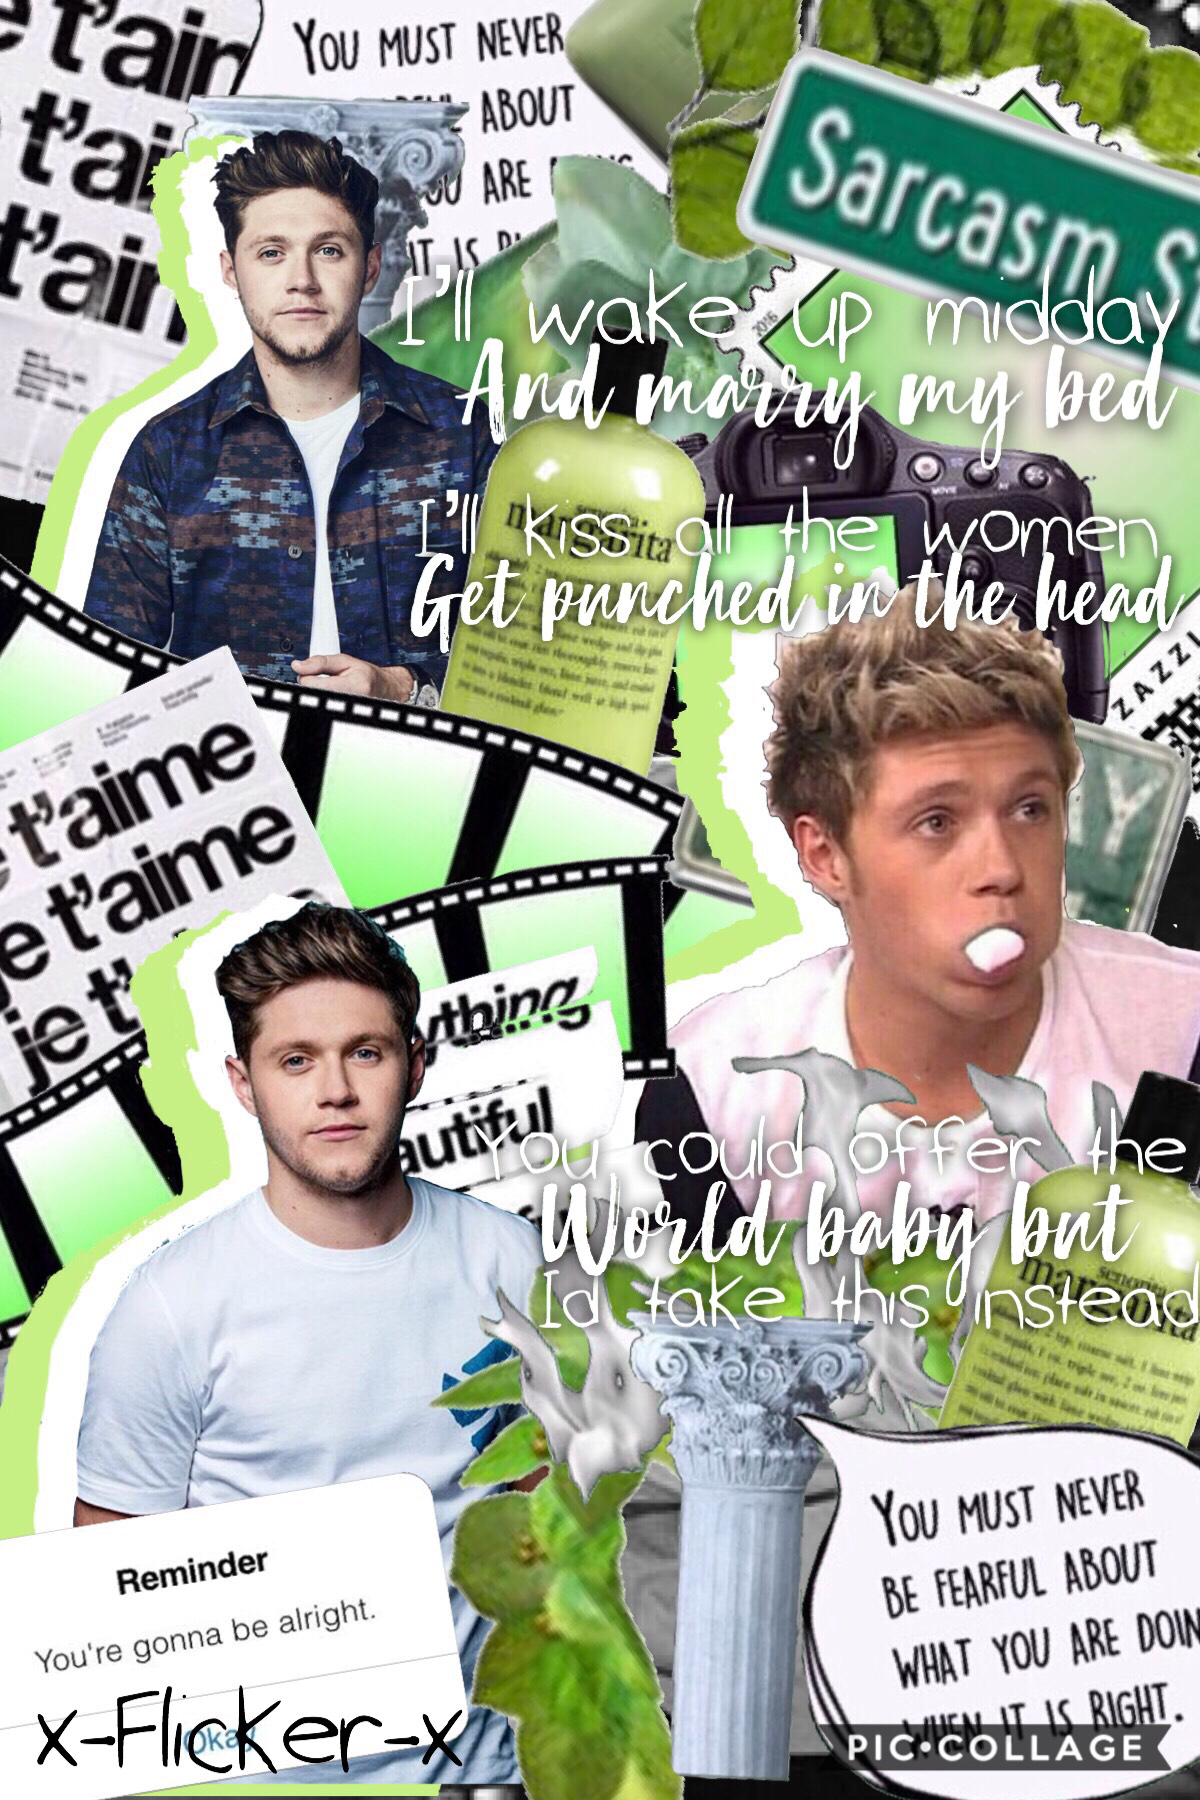 Tappppp
Aye I tried 😂 this is my favorite part of the song for obvious reasons🤣 it’s called on my own by the one and only Niall horan💕🤣